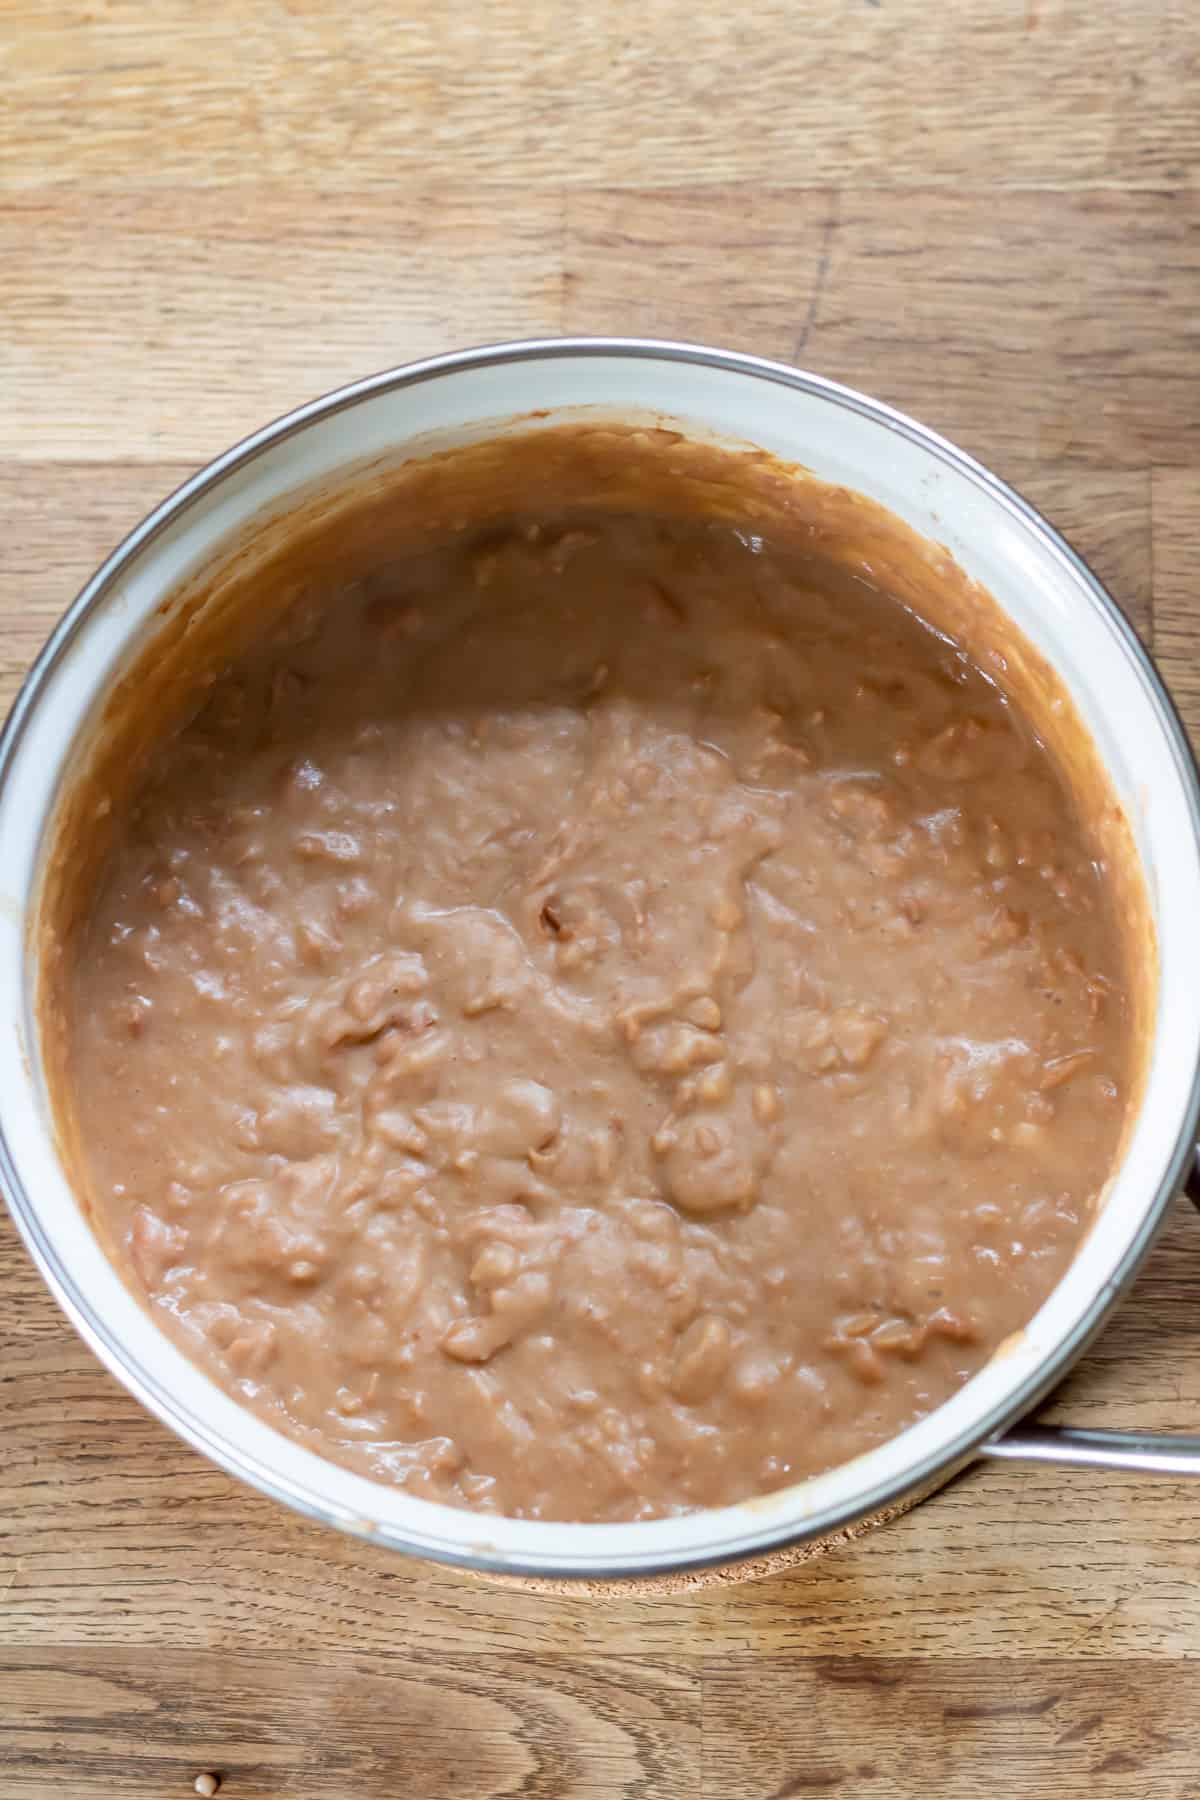 Refried beans made in a pot.